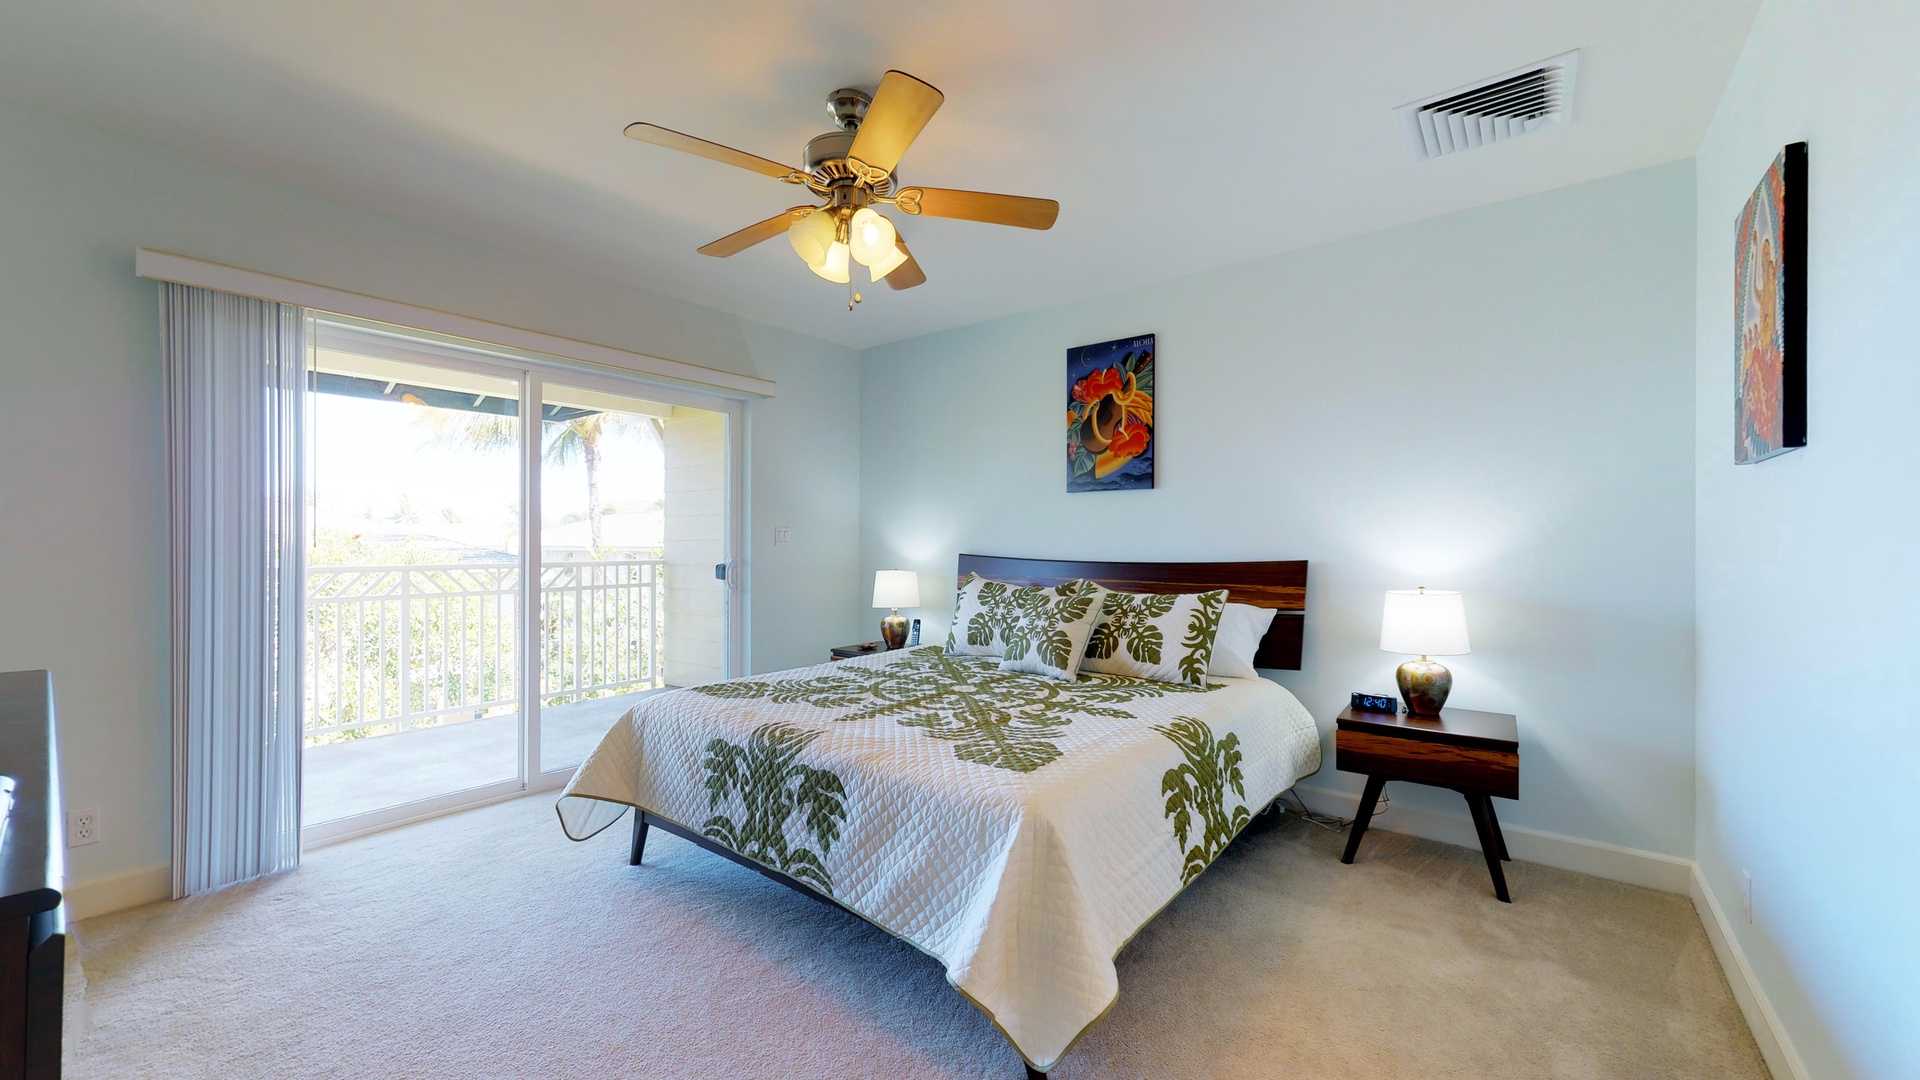 Kapolei Vacation Rentals, Ko Olina Kai 1035D - The primary guest bedroom with a king bed and lanai access upstairs.